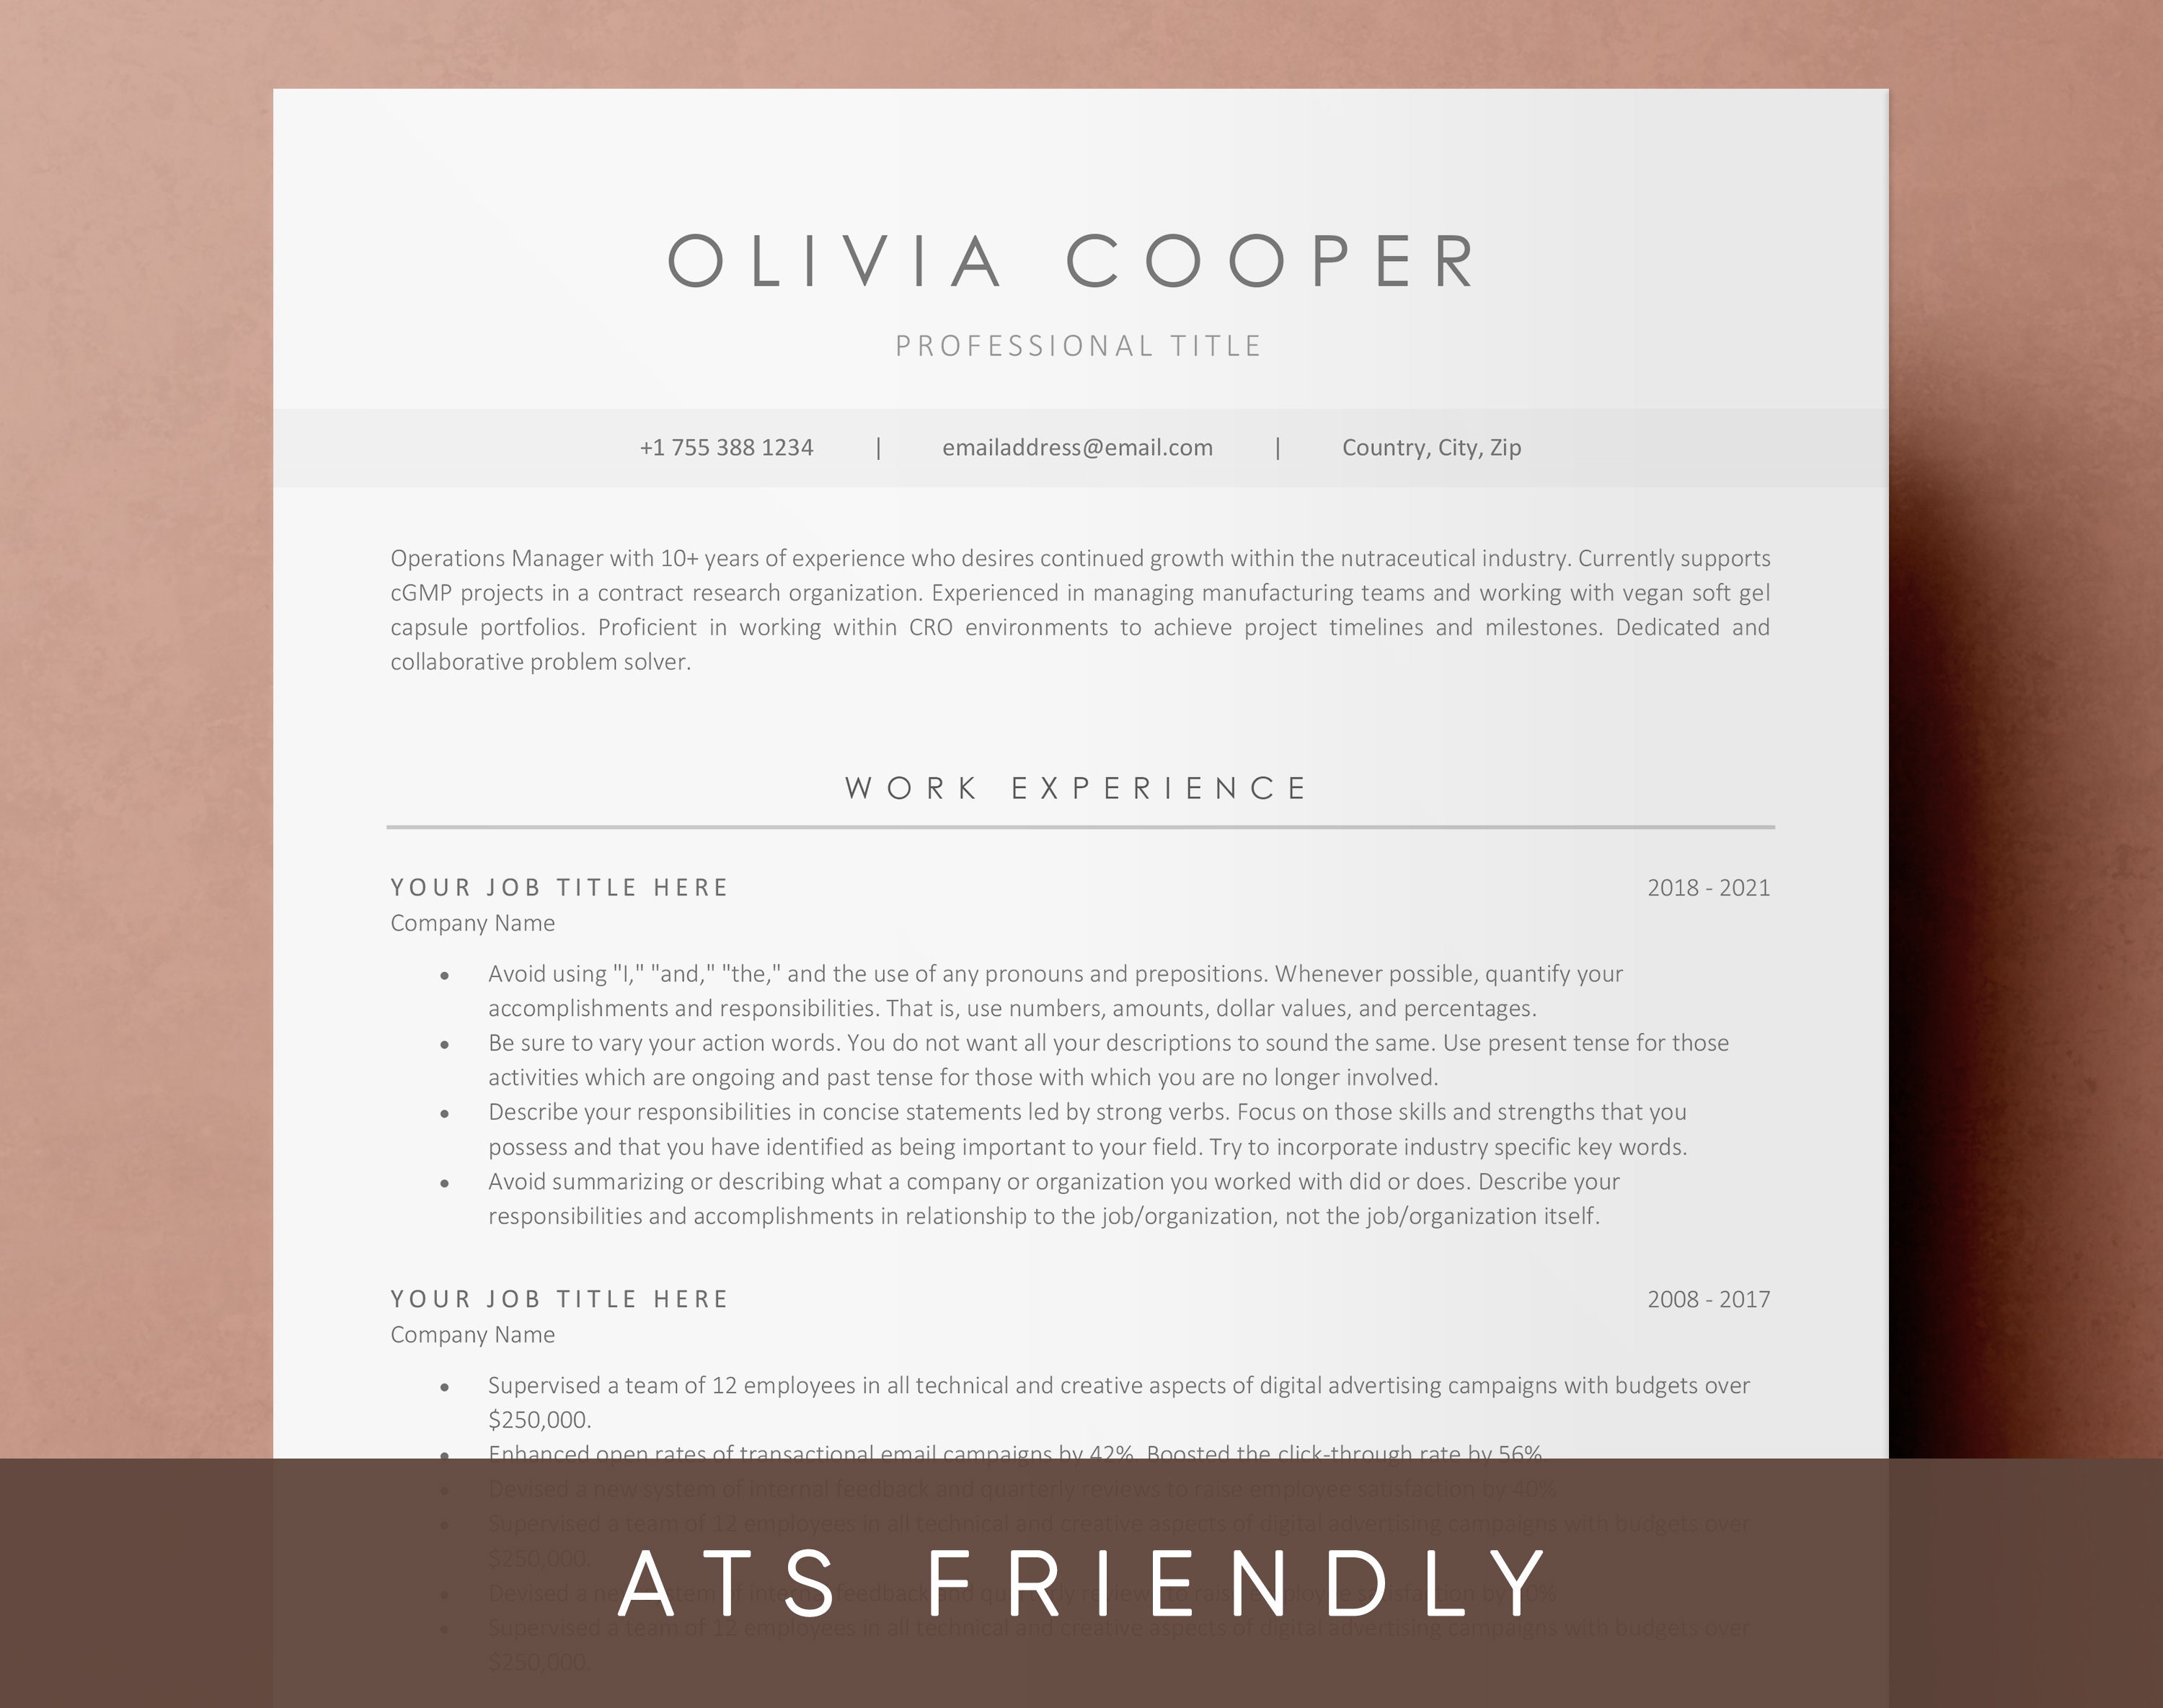 ats-friendly-resume-template-for-microsoft-word-cover-letter-etsy